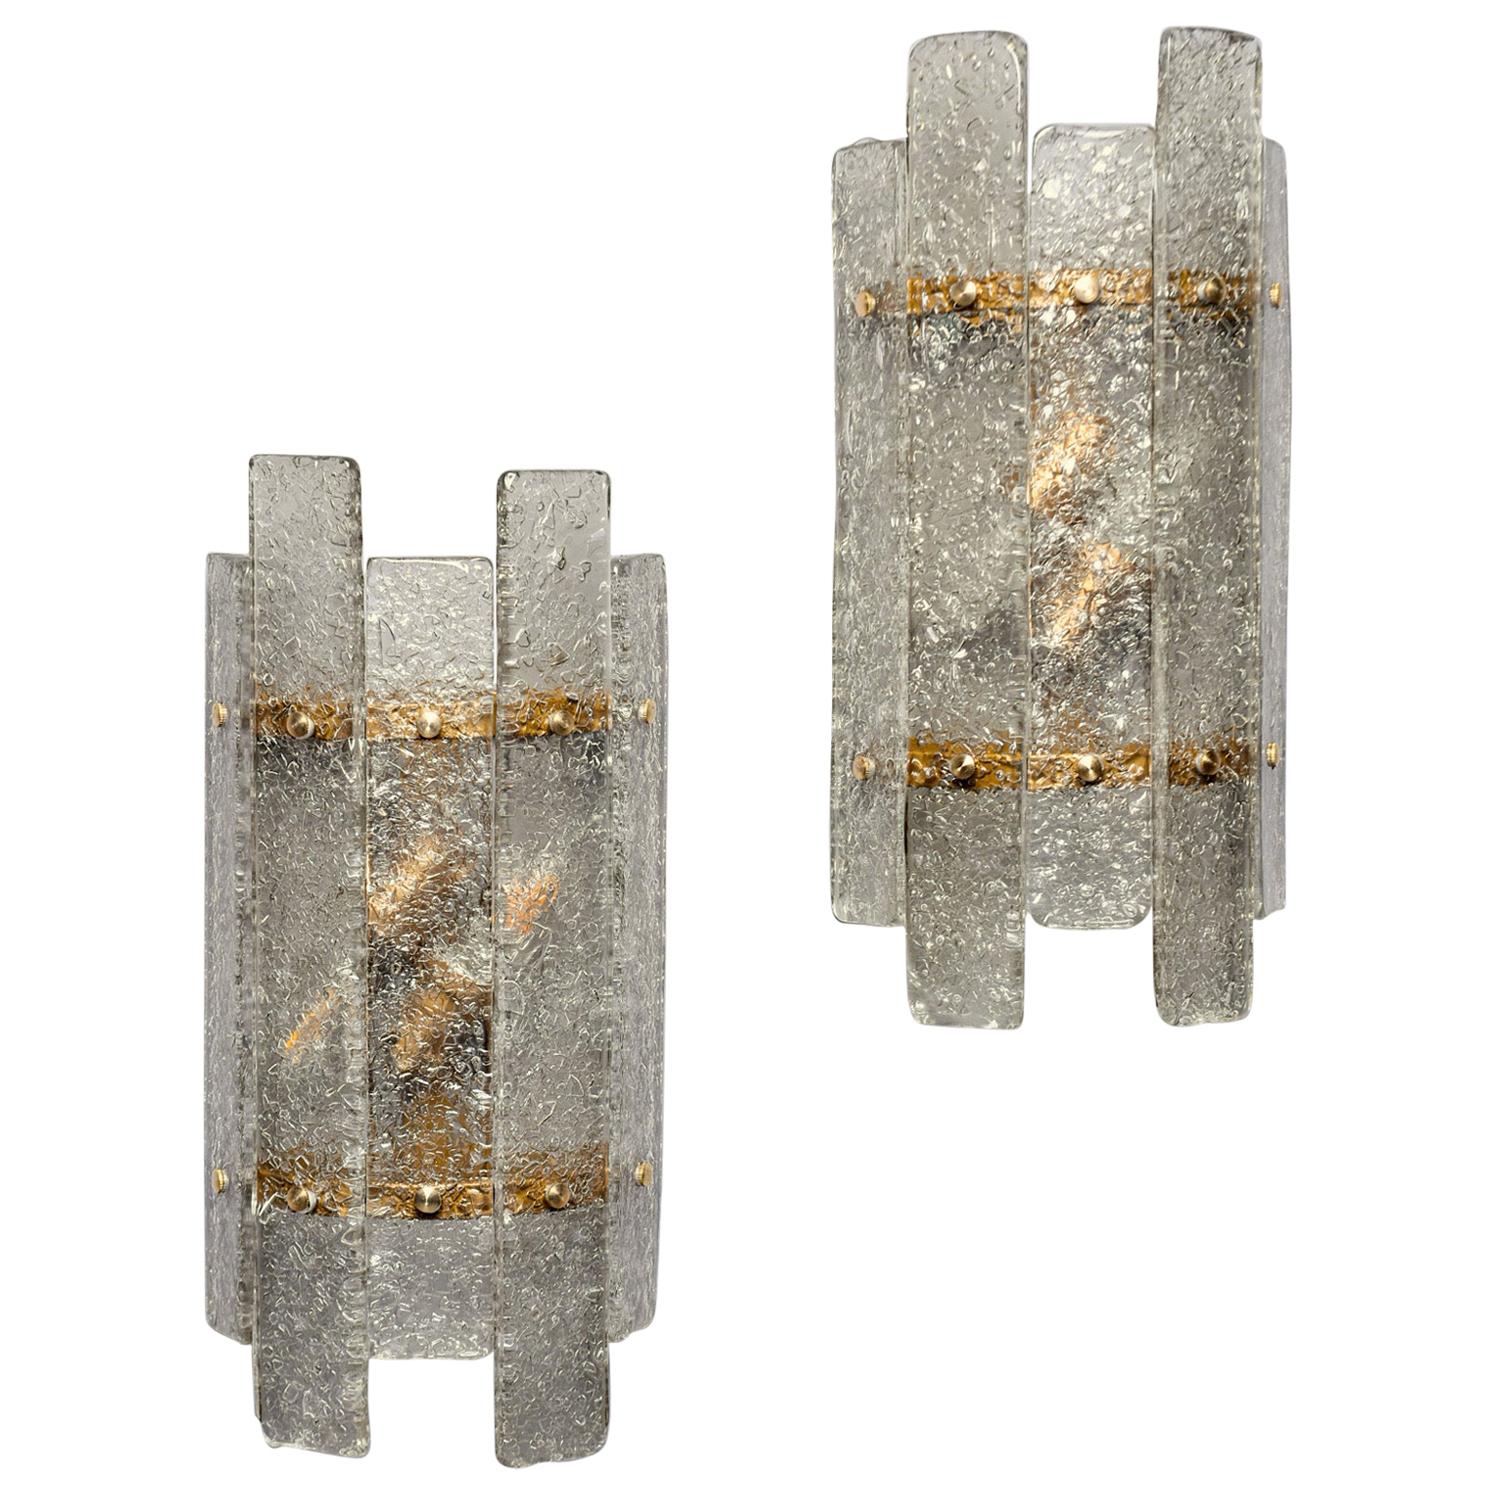 Pair of Art Deco Style Sconces with Murano Glass Panels and Brass Fittings